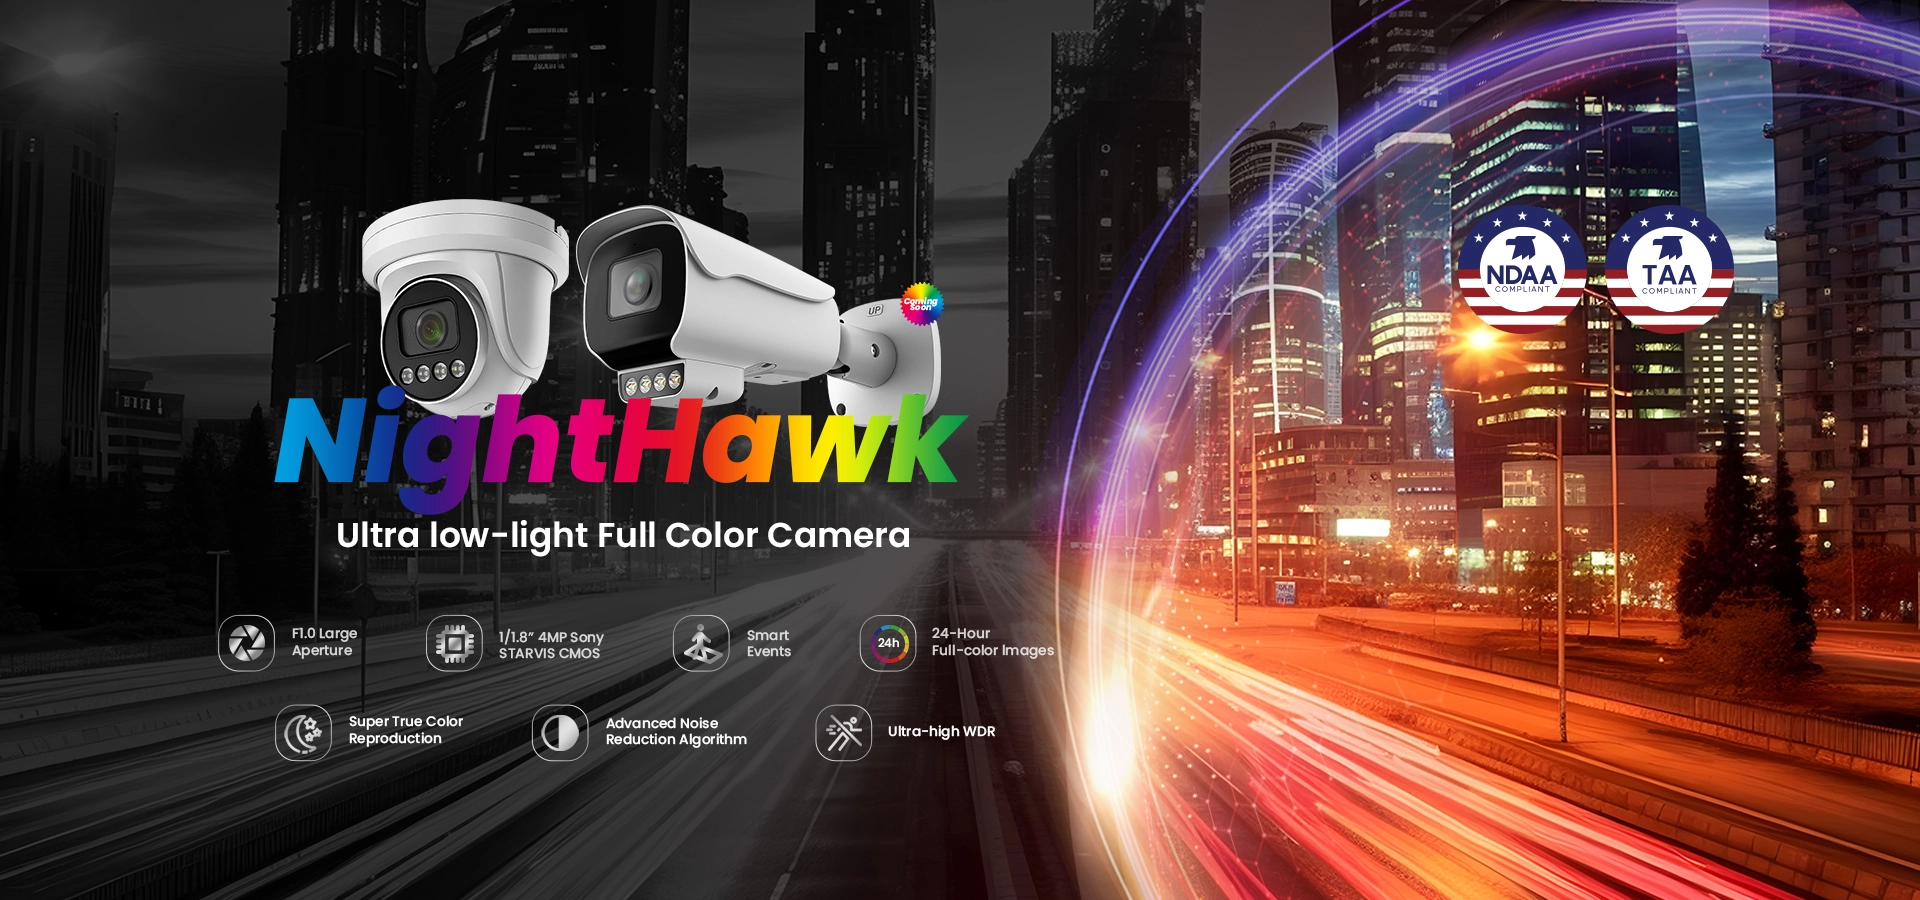 Sunell Nighthawk Ultra-low-light Intelligent Full-color Bullet Camera - -Capture crystal-clear images in ultra-low-light environments, all without the need for supplementary lighting minimal motion blur.